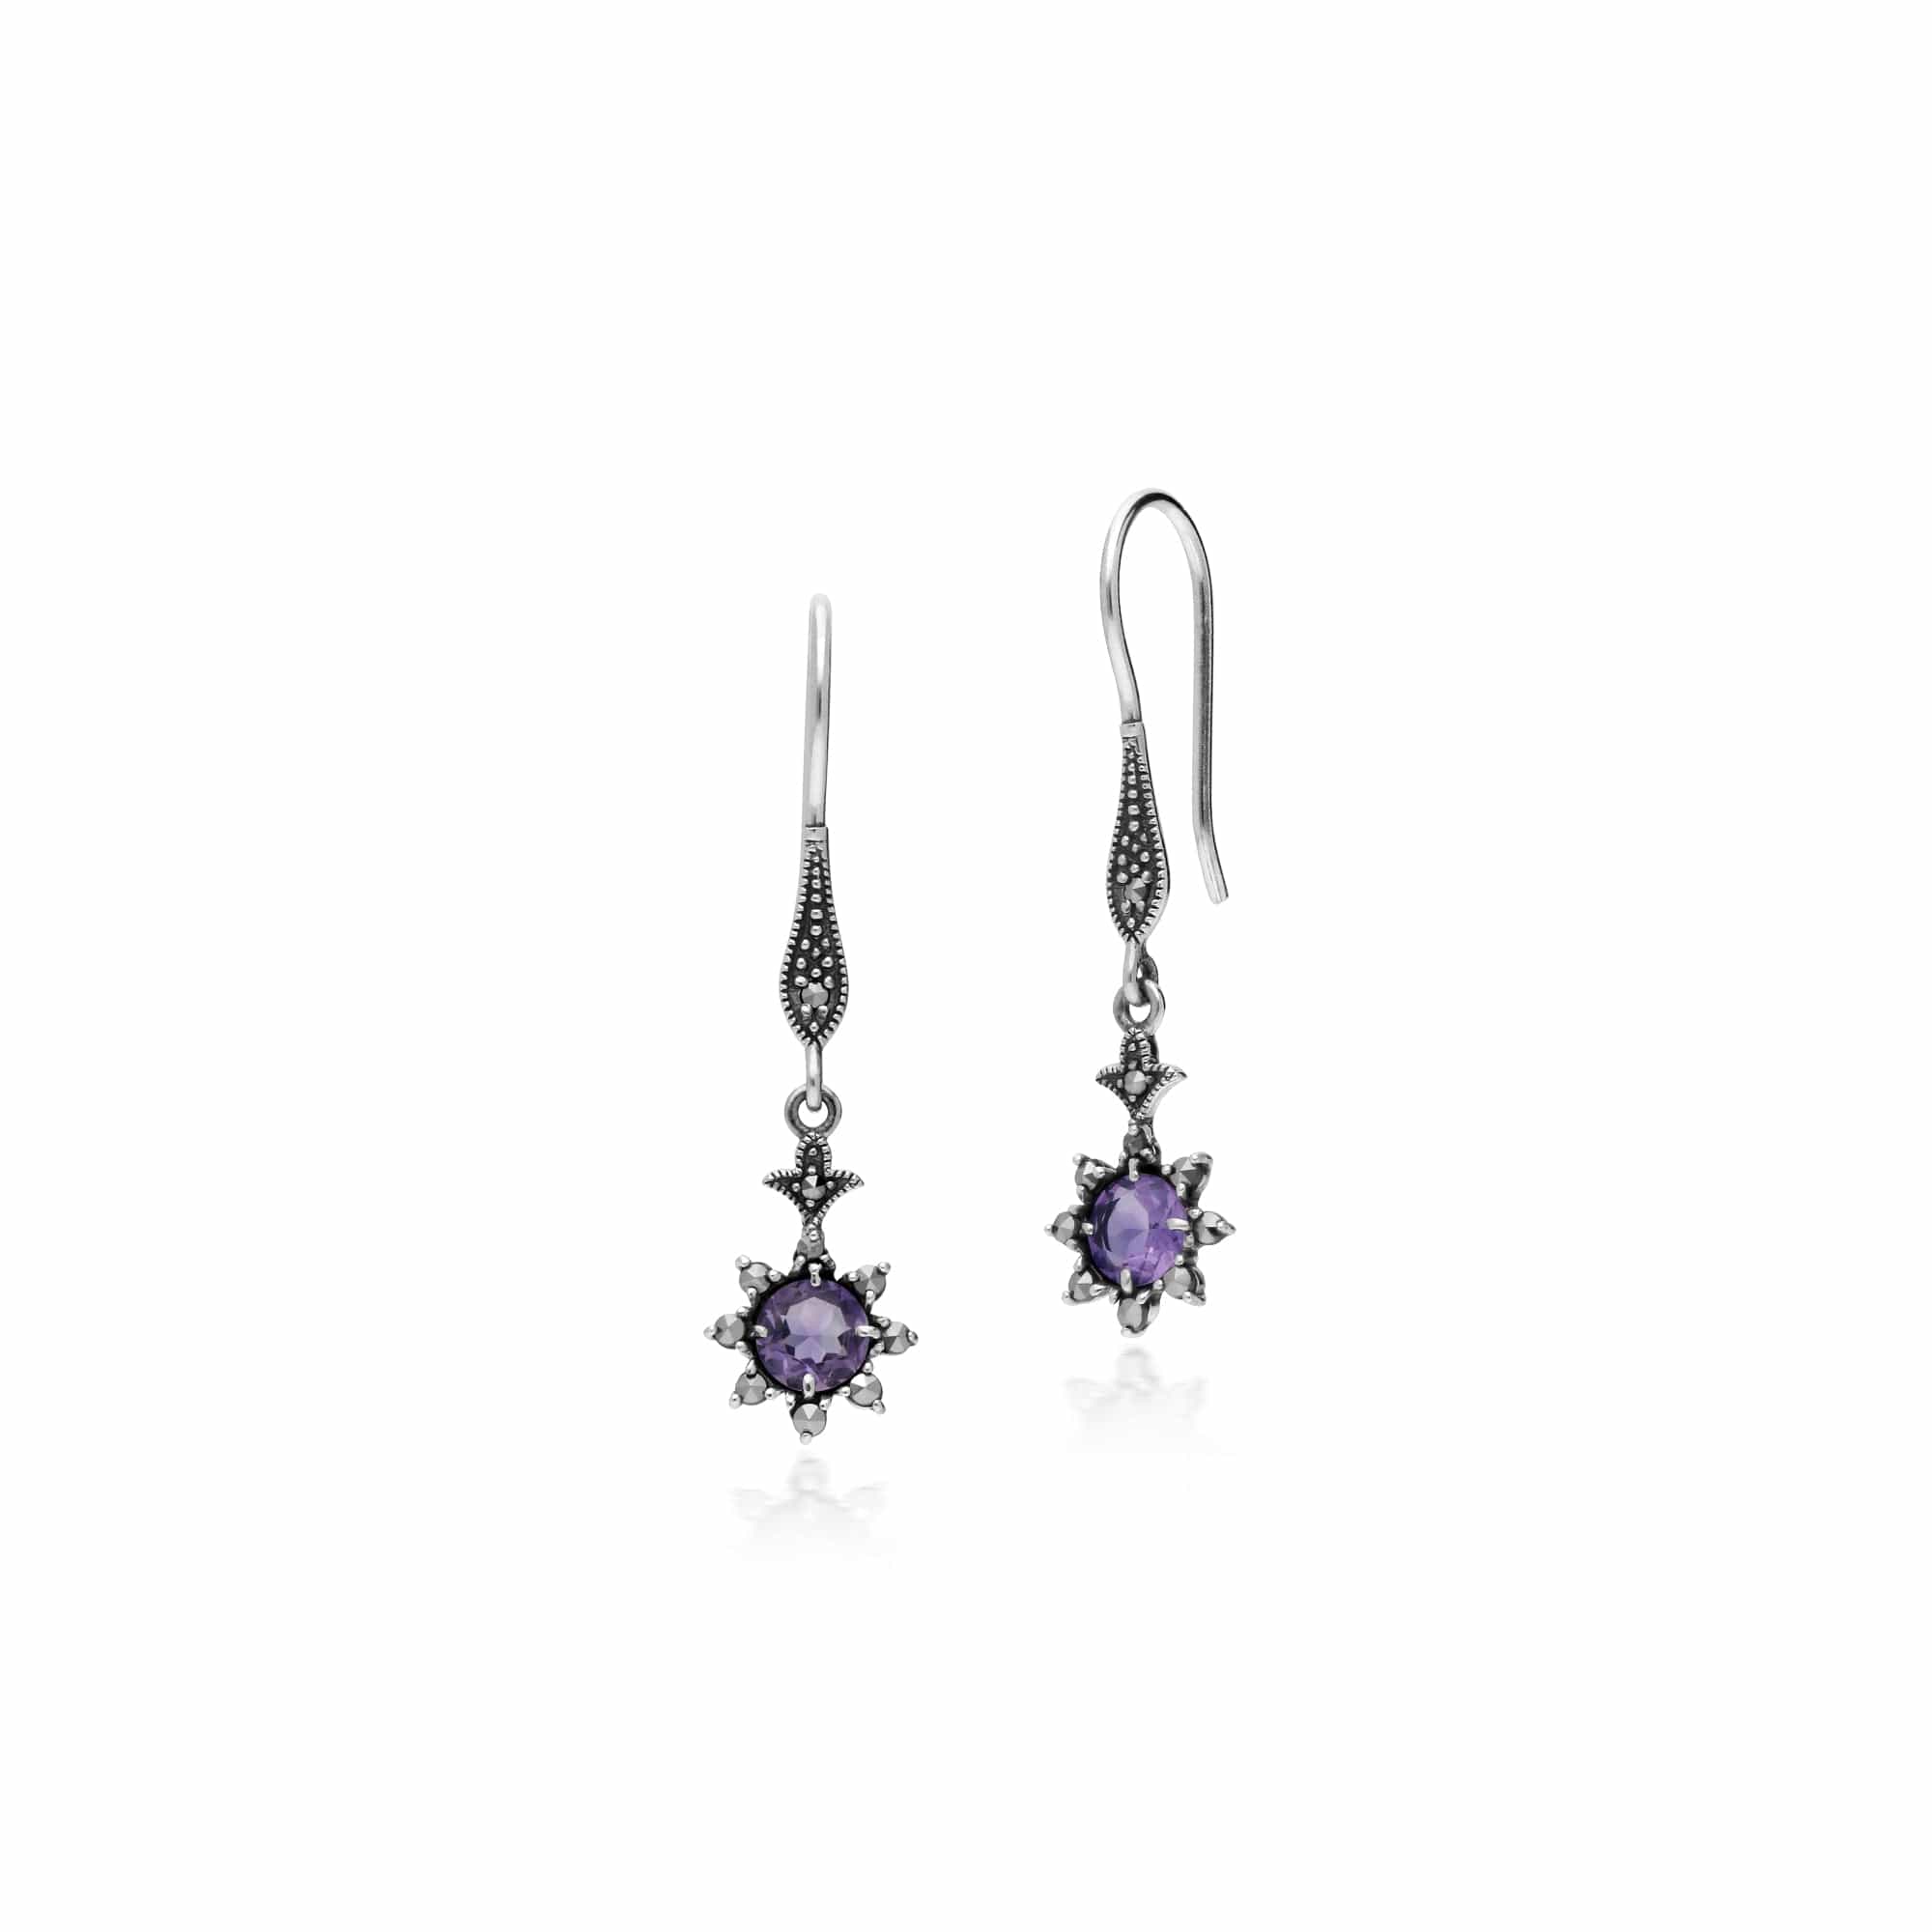 214E860602925-214R599502925 Art Nouveau Style Style Round Amethyst & Marcasite Starburst Drop Earrings & Ring Set in 925 Sterling Silver 2